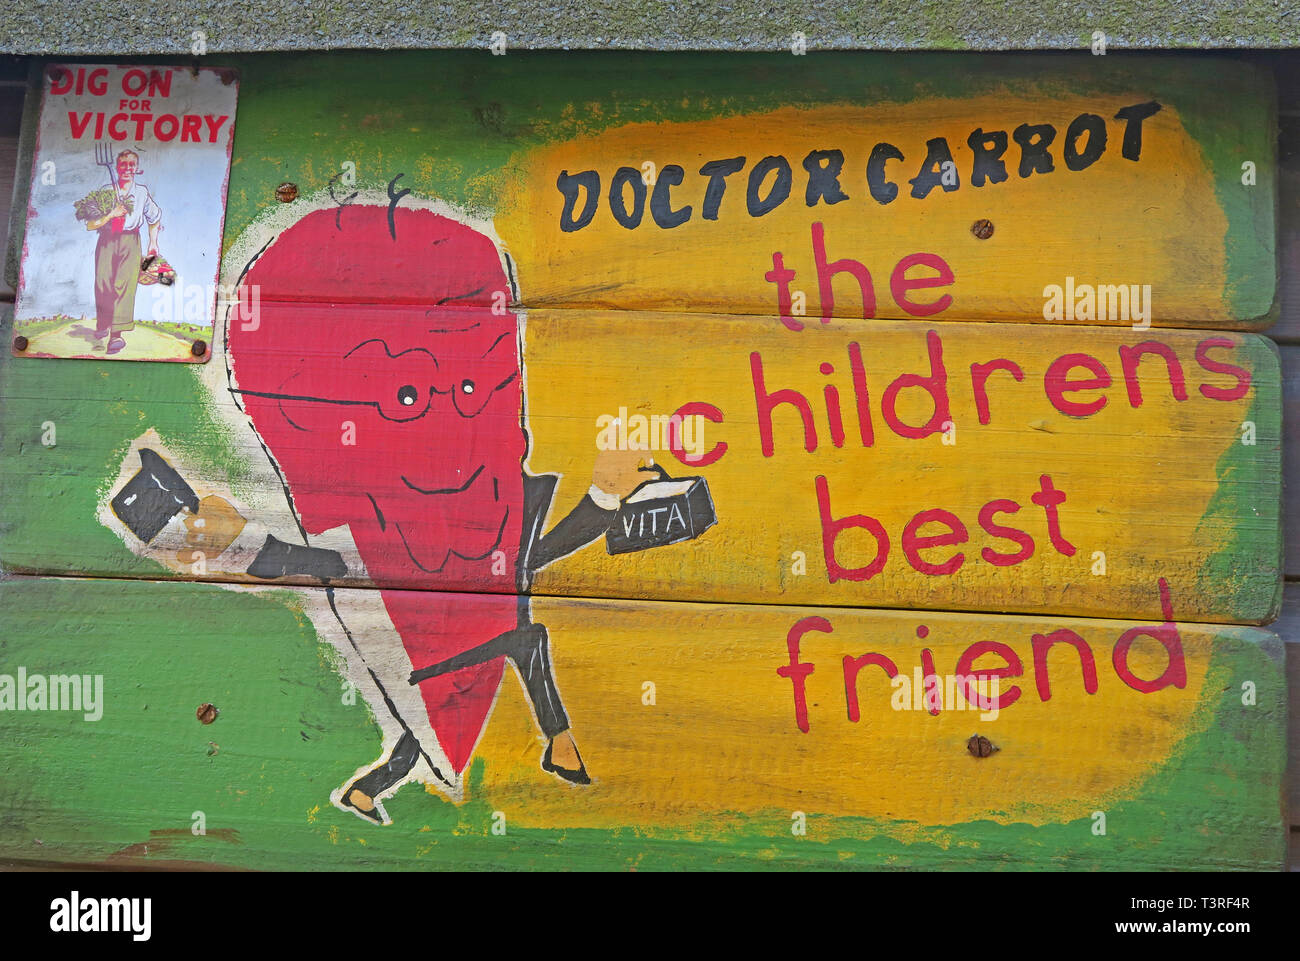 Dig On For Victory, Doctor Carrot, The Childrens Best Friend, Foods for healthy eating sign Stock Photo